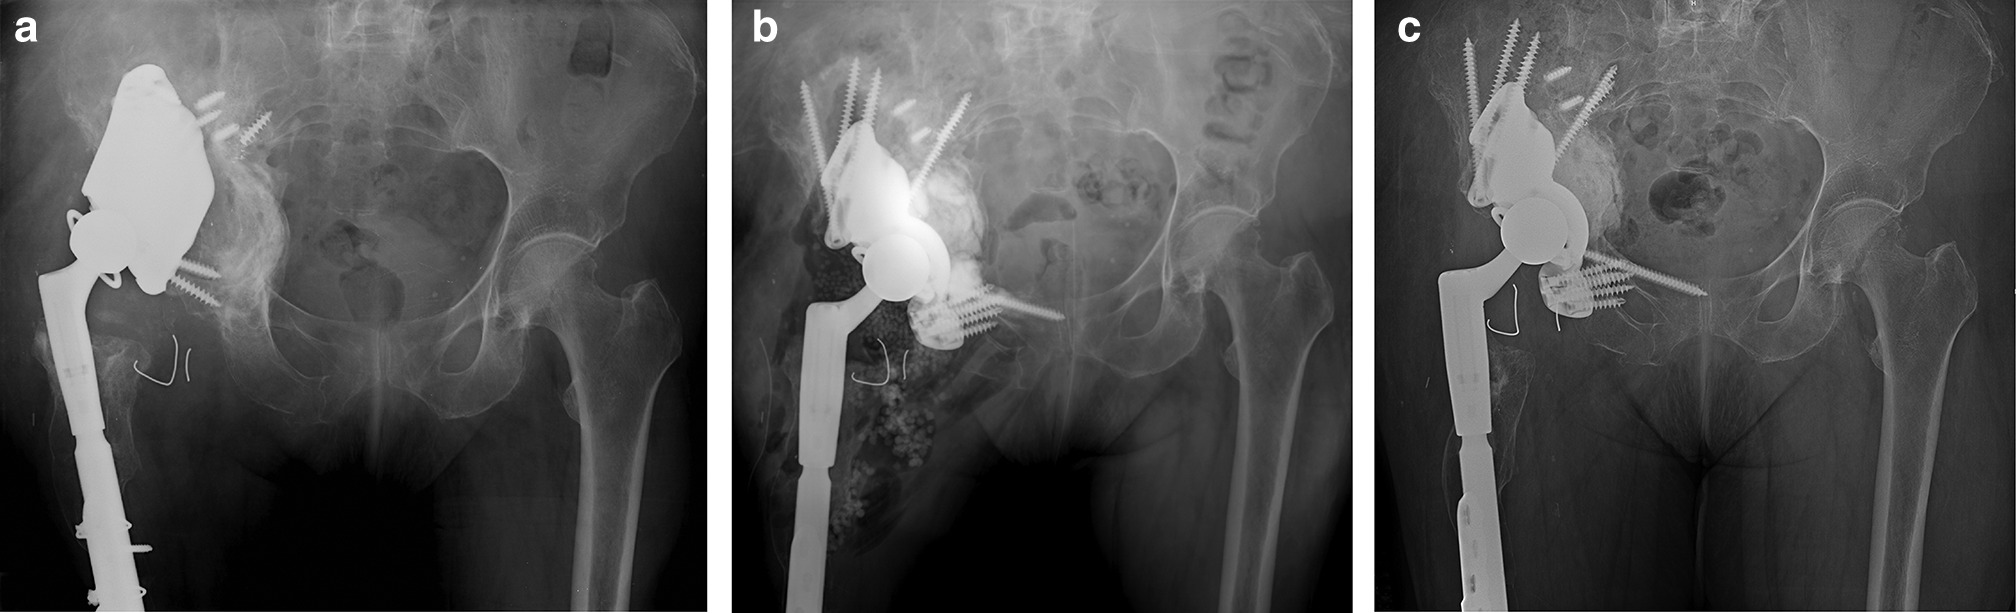 Fig. 3 
          a) Anteroposterior (AP) radiograph of pelvis and upper femur region showing loose spanning porous cage of a 65-year-old female who had undergone five prior revision total hip arthroplasty procedures resulting from prior trauma. The cage has failed via an abduction pullout mechanism from the inferior pelvis. An extended polyethylene (+ 5 mm) constrained bearing is locked into the cage. CT scan showed segmental bone loss of posterior column, medial quadrilateral plate, and anterior rim. b) Postoperative AP radiograph showing pelvic reconstruction with a custom triflange porous cage; 28 ml of Cerament was injected behind the cage into all defects before inserting a Freedom constrained bearing into the ring-loc mechanism. A long medullary screw was inserted into the superior ramus to counteract abduction pullout stresses. c) AP pelvic radiograph 66 months postoperatively. Pelvic reconstruction remains stable. The bone graft substitute site shows retroacetabular remodelling, but no trabecular bone patterns are observed.
        